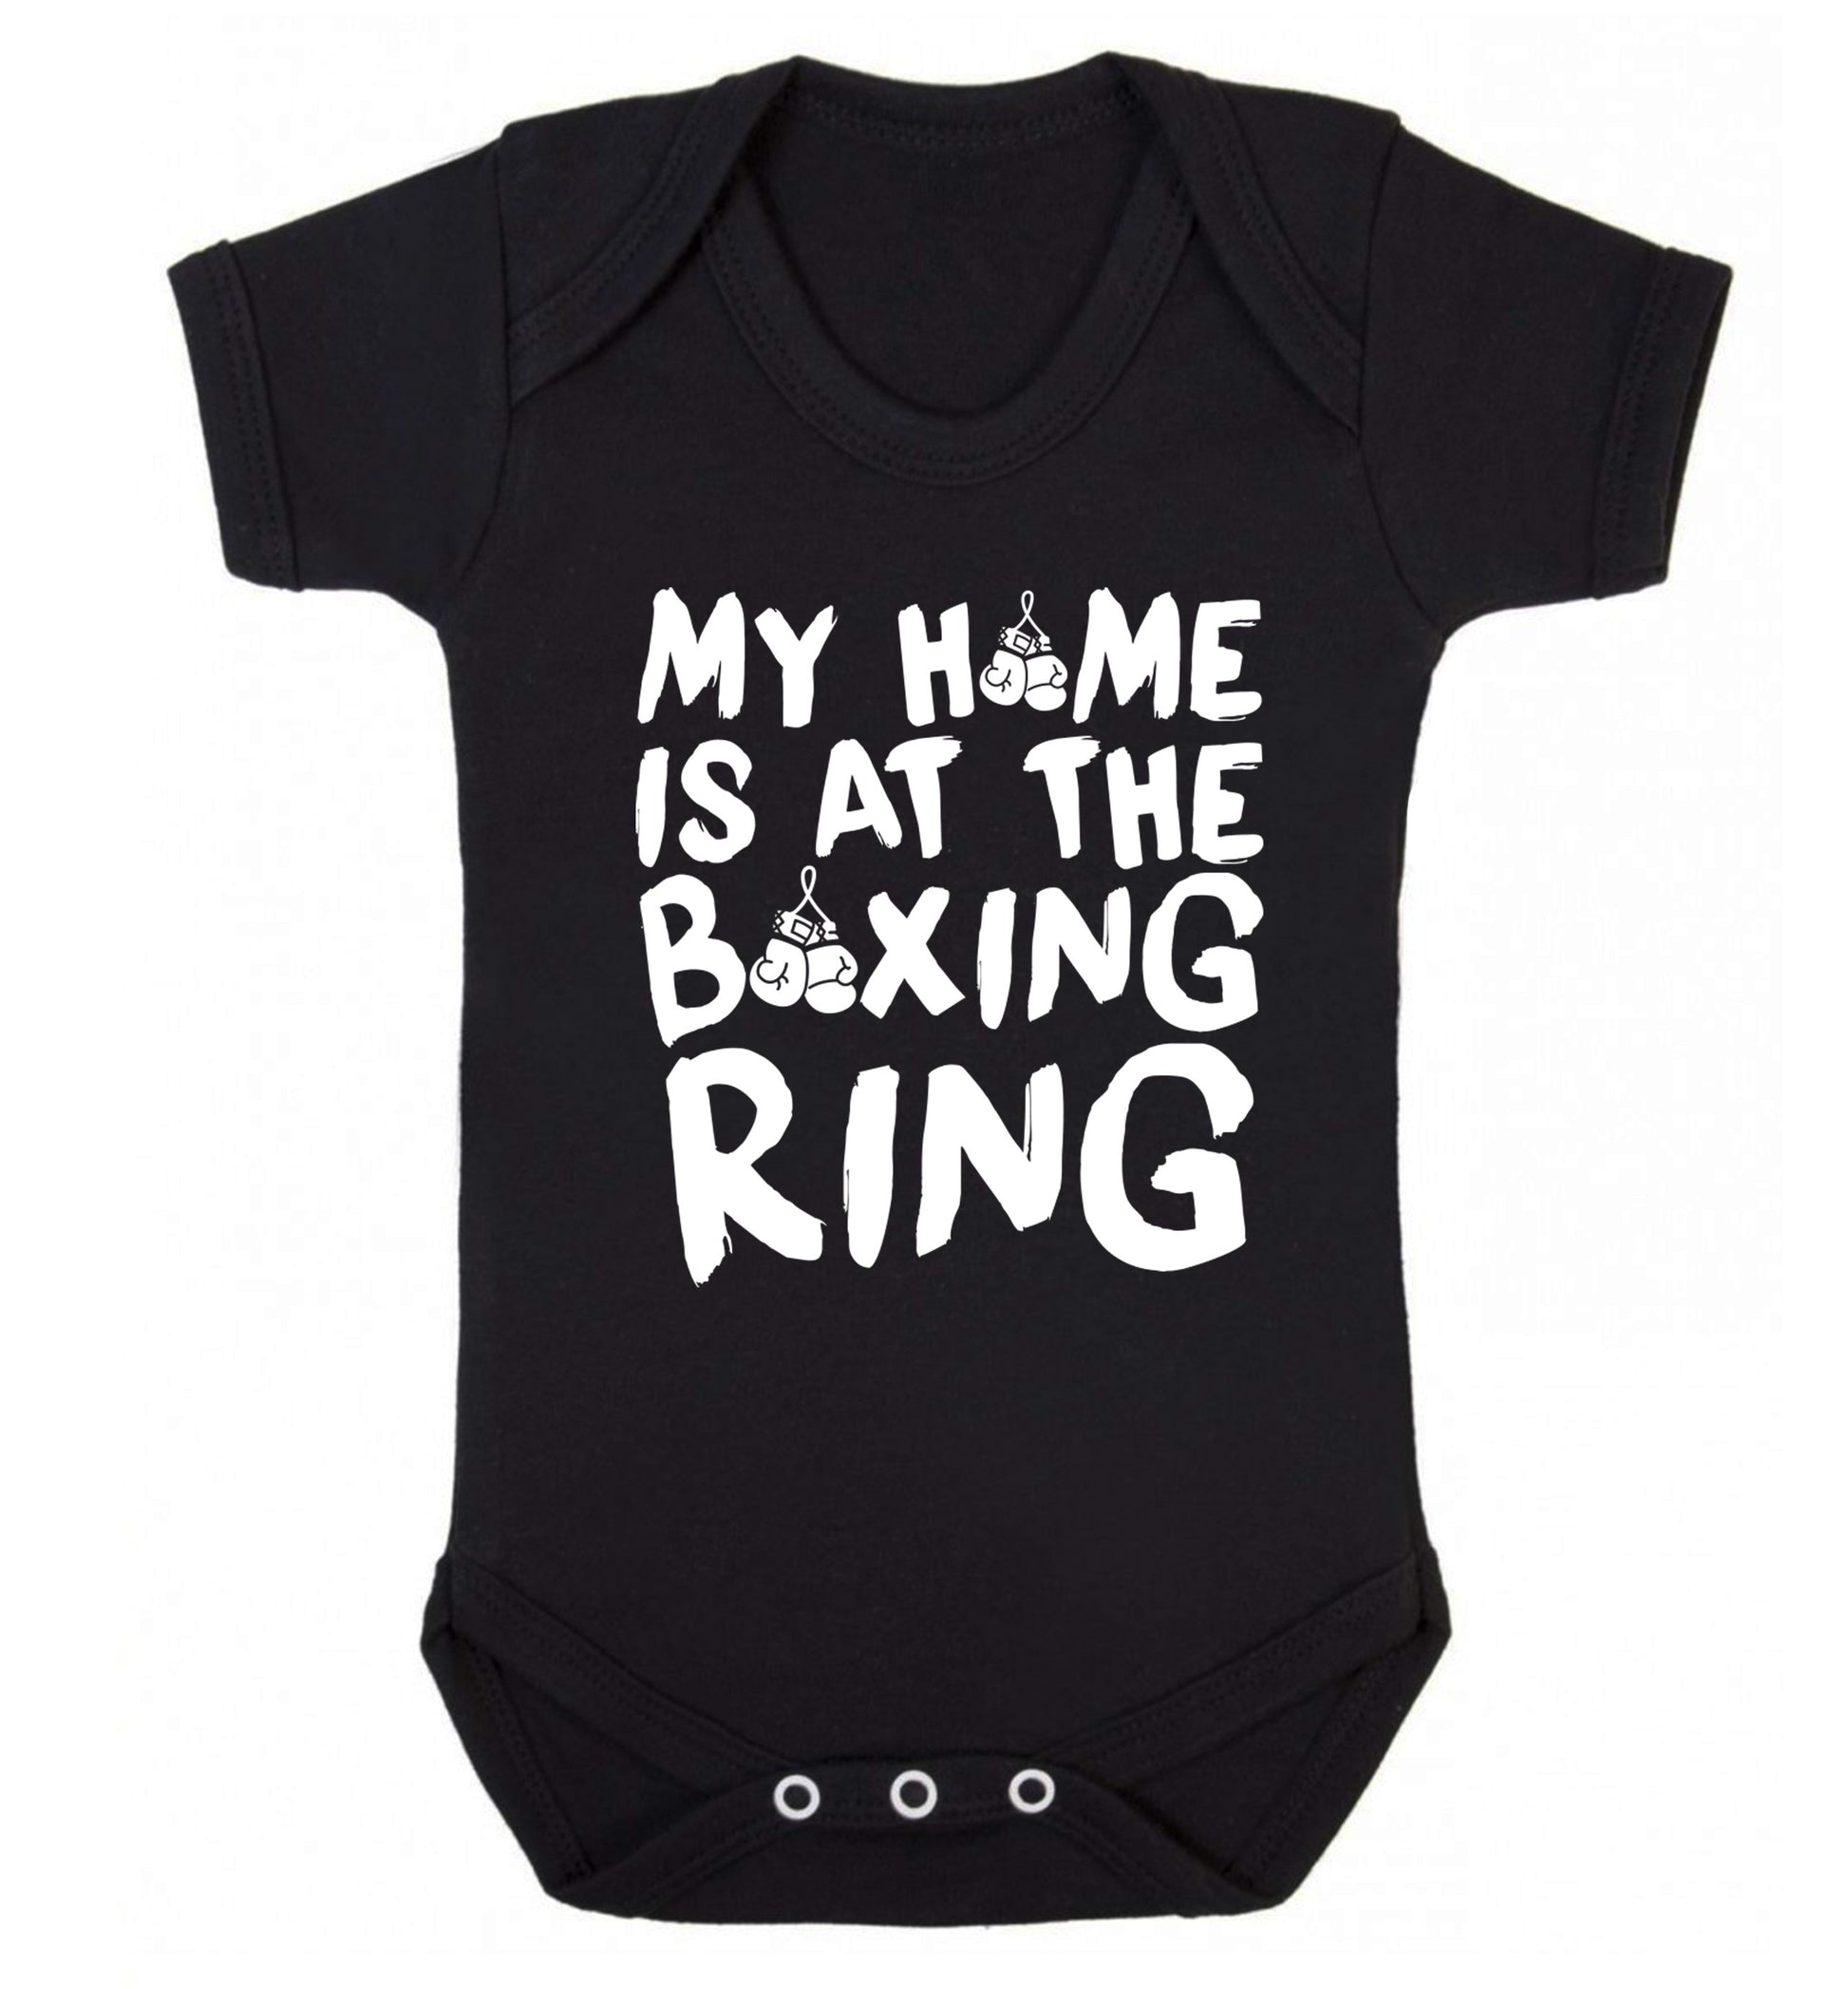 My home is at the boxing ring Baby Vest black 18-24 months